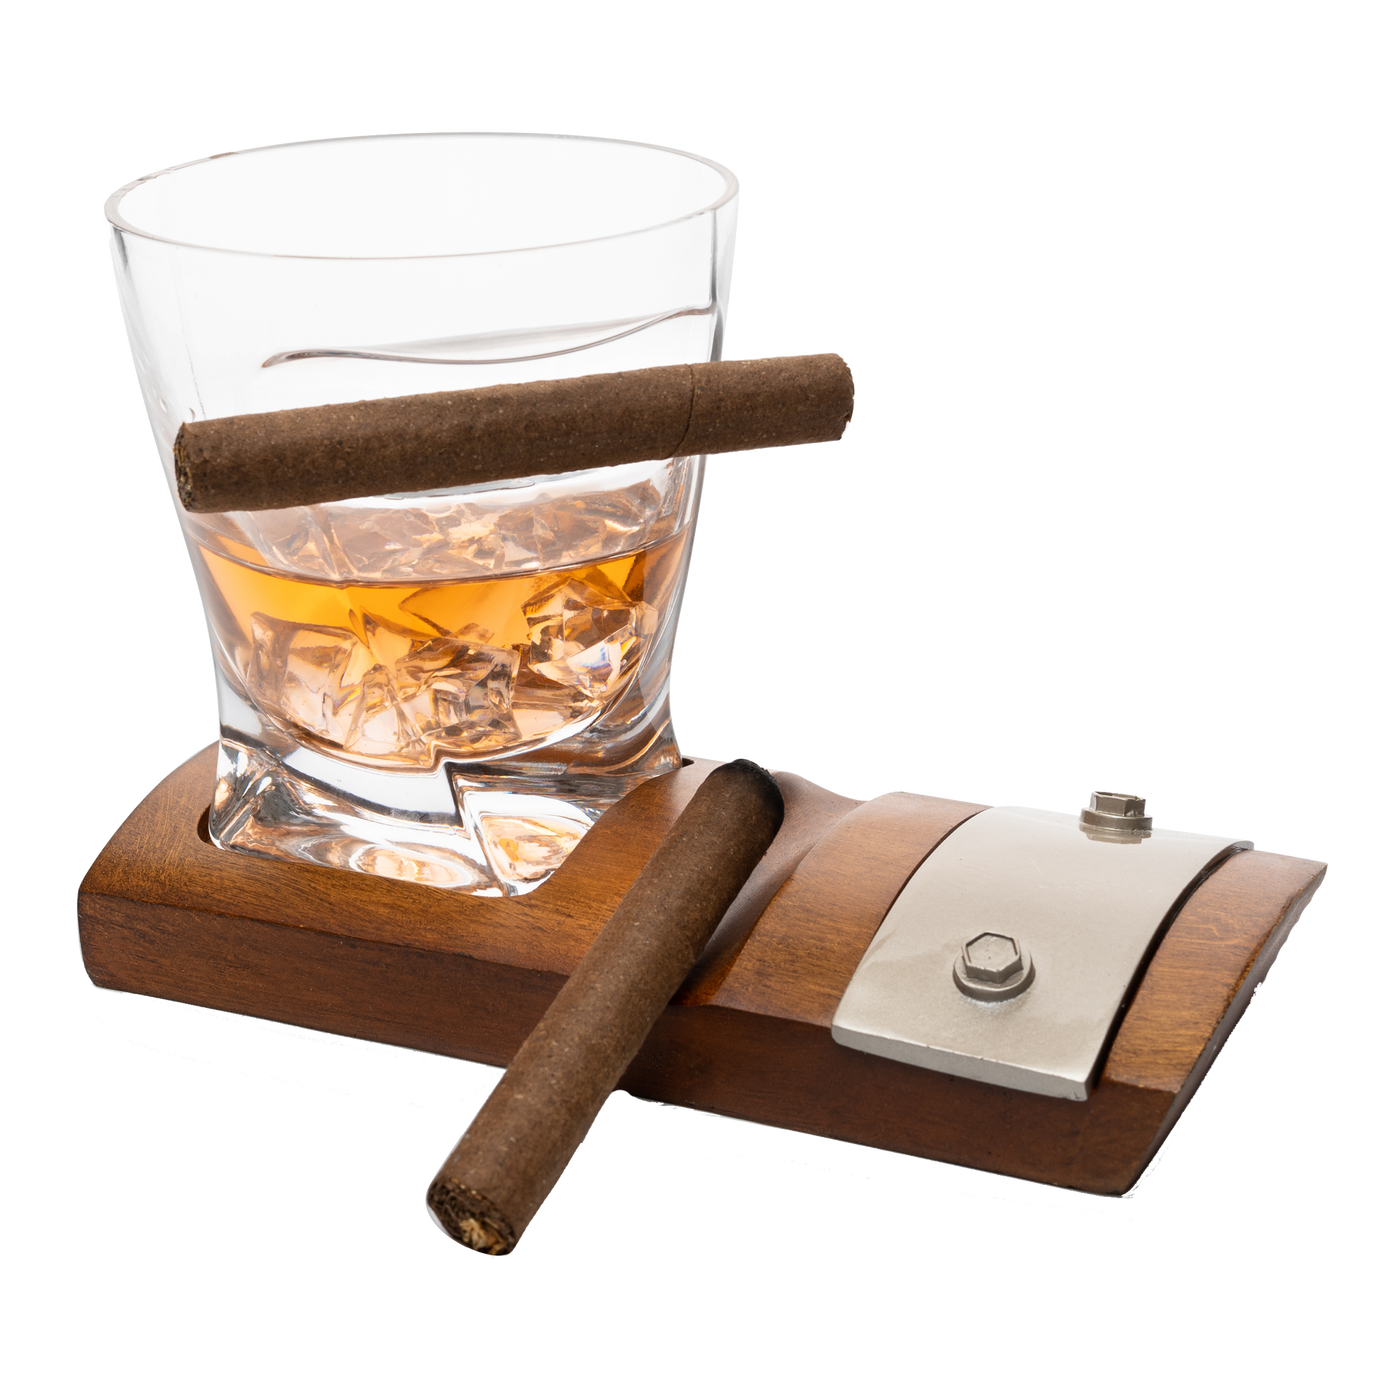 Liquor Lux Glass & Coaster & with A Unique Whiskey Glass Slot to Hold Item, Whiskey Glass Gift Set, Item Rest, Accessory Set Gift for Dad, Men Home Office Decor Gifts, Fathers Day - Chirstmas